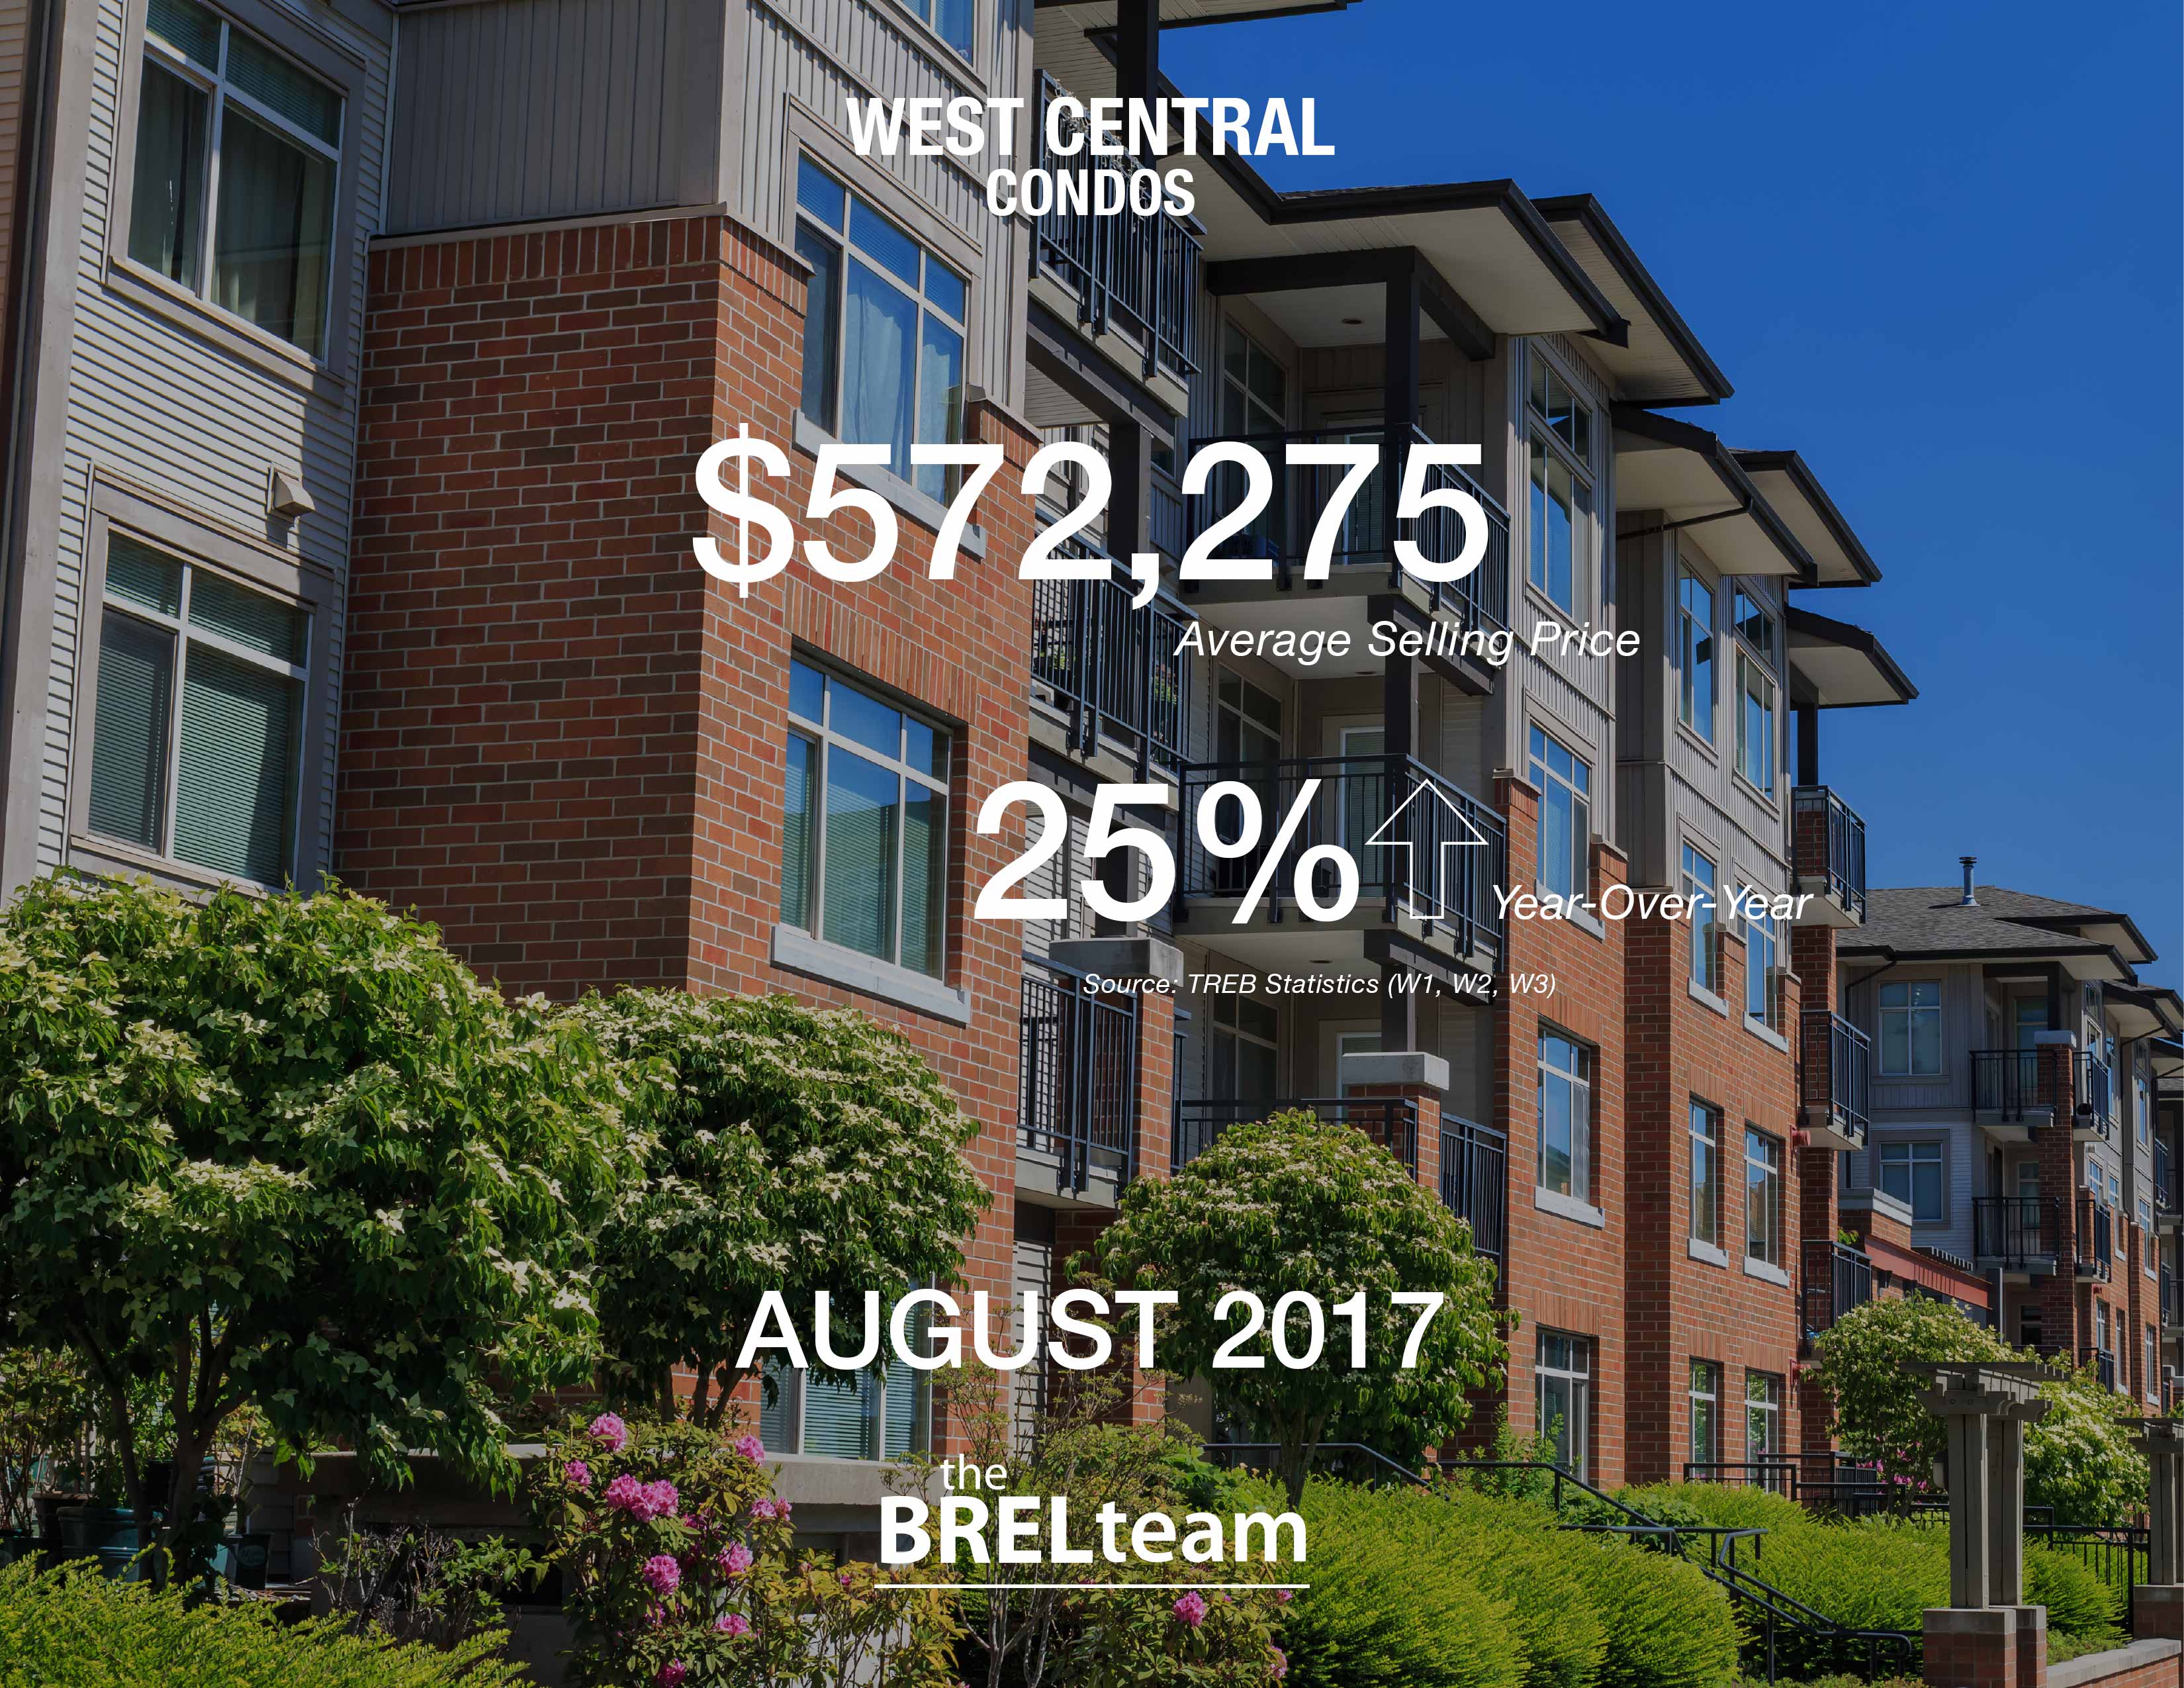 the BREL team, getwhatyouwant.ca, Top Toronto Realtor, Top Toronto Real Estate Agent, For Sale, Toronto Real Estate Market